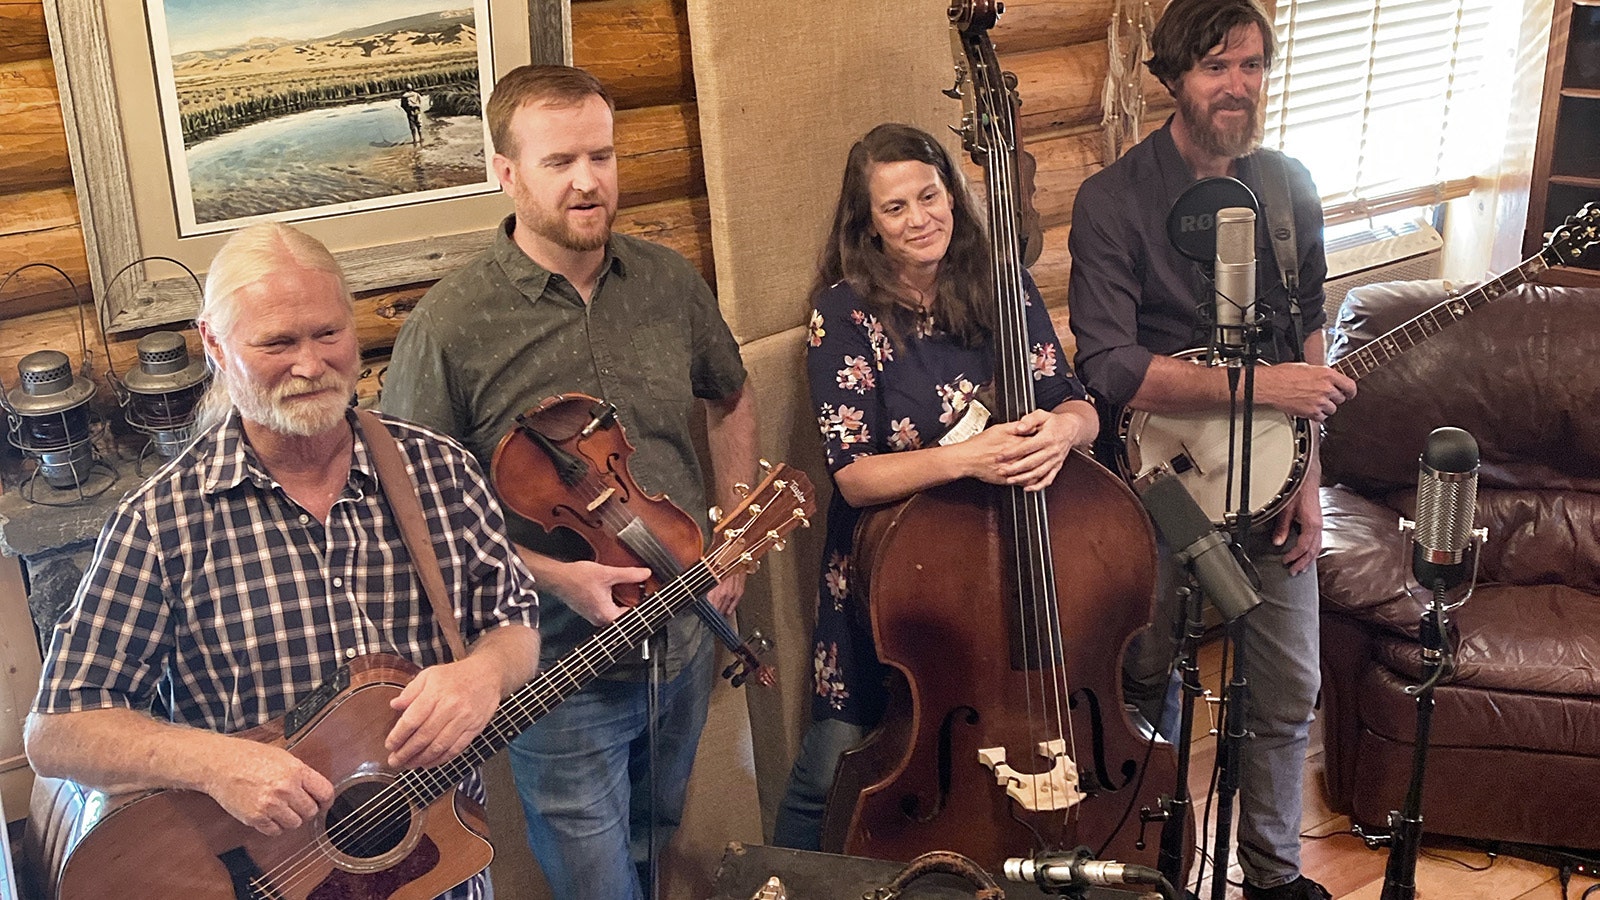 Low Water String Band is one of 14 Wyoming musicians and bands that make up the first iteration of the WyoFolk Project.